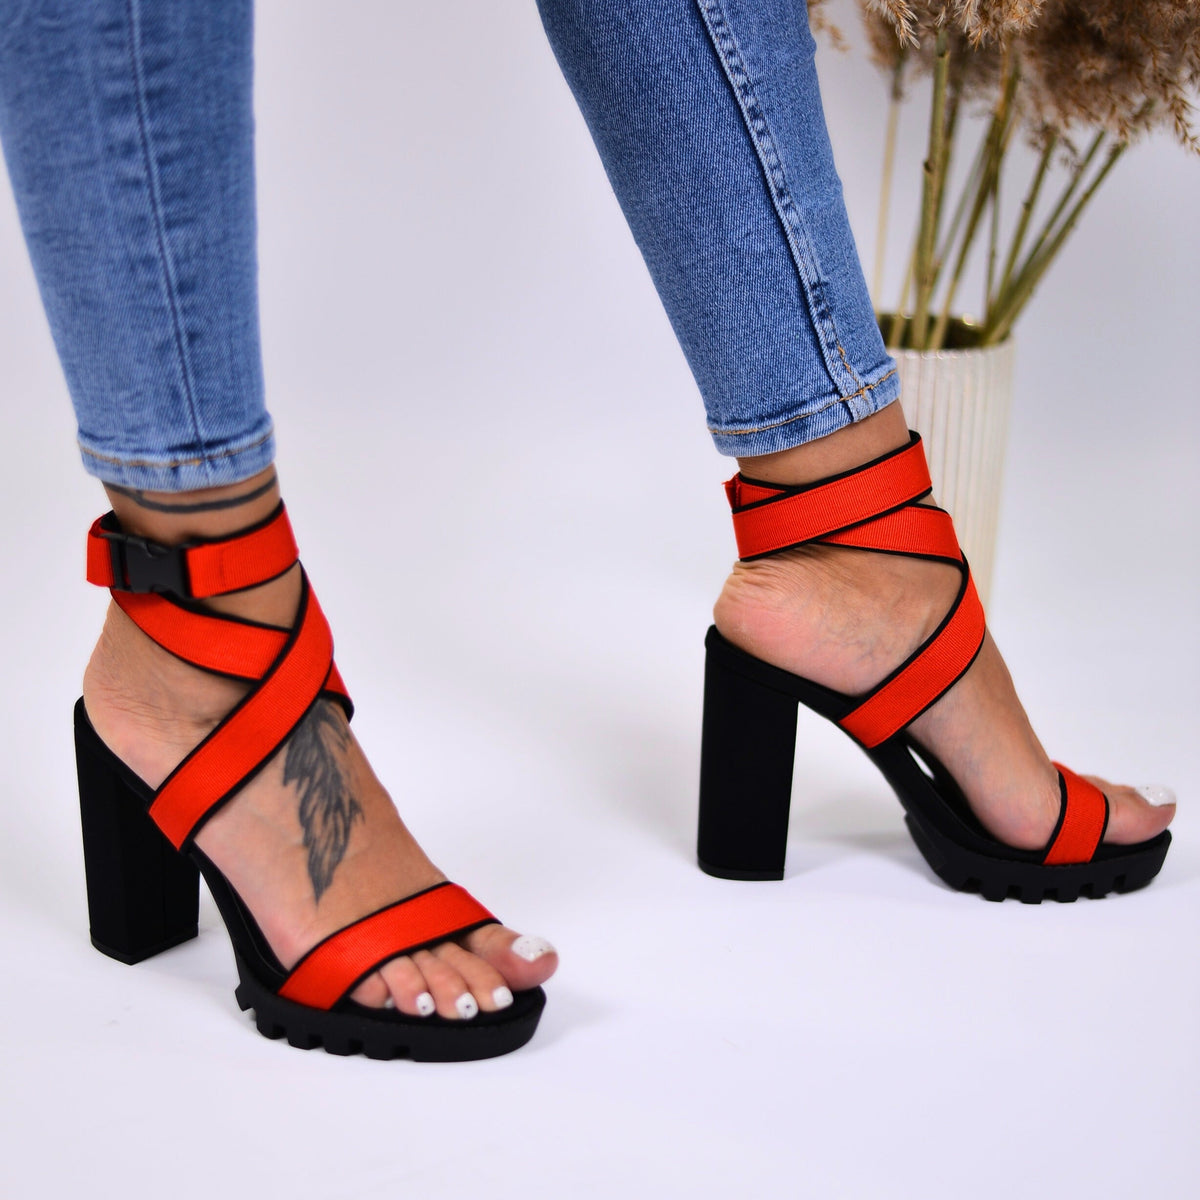 Women's Sandals With Heels, Daxia, Red